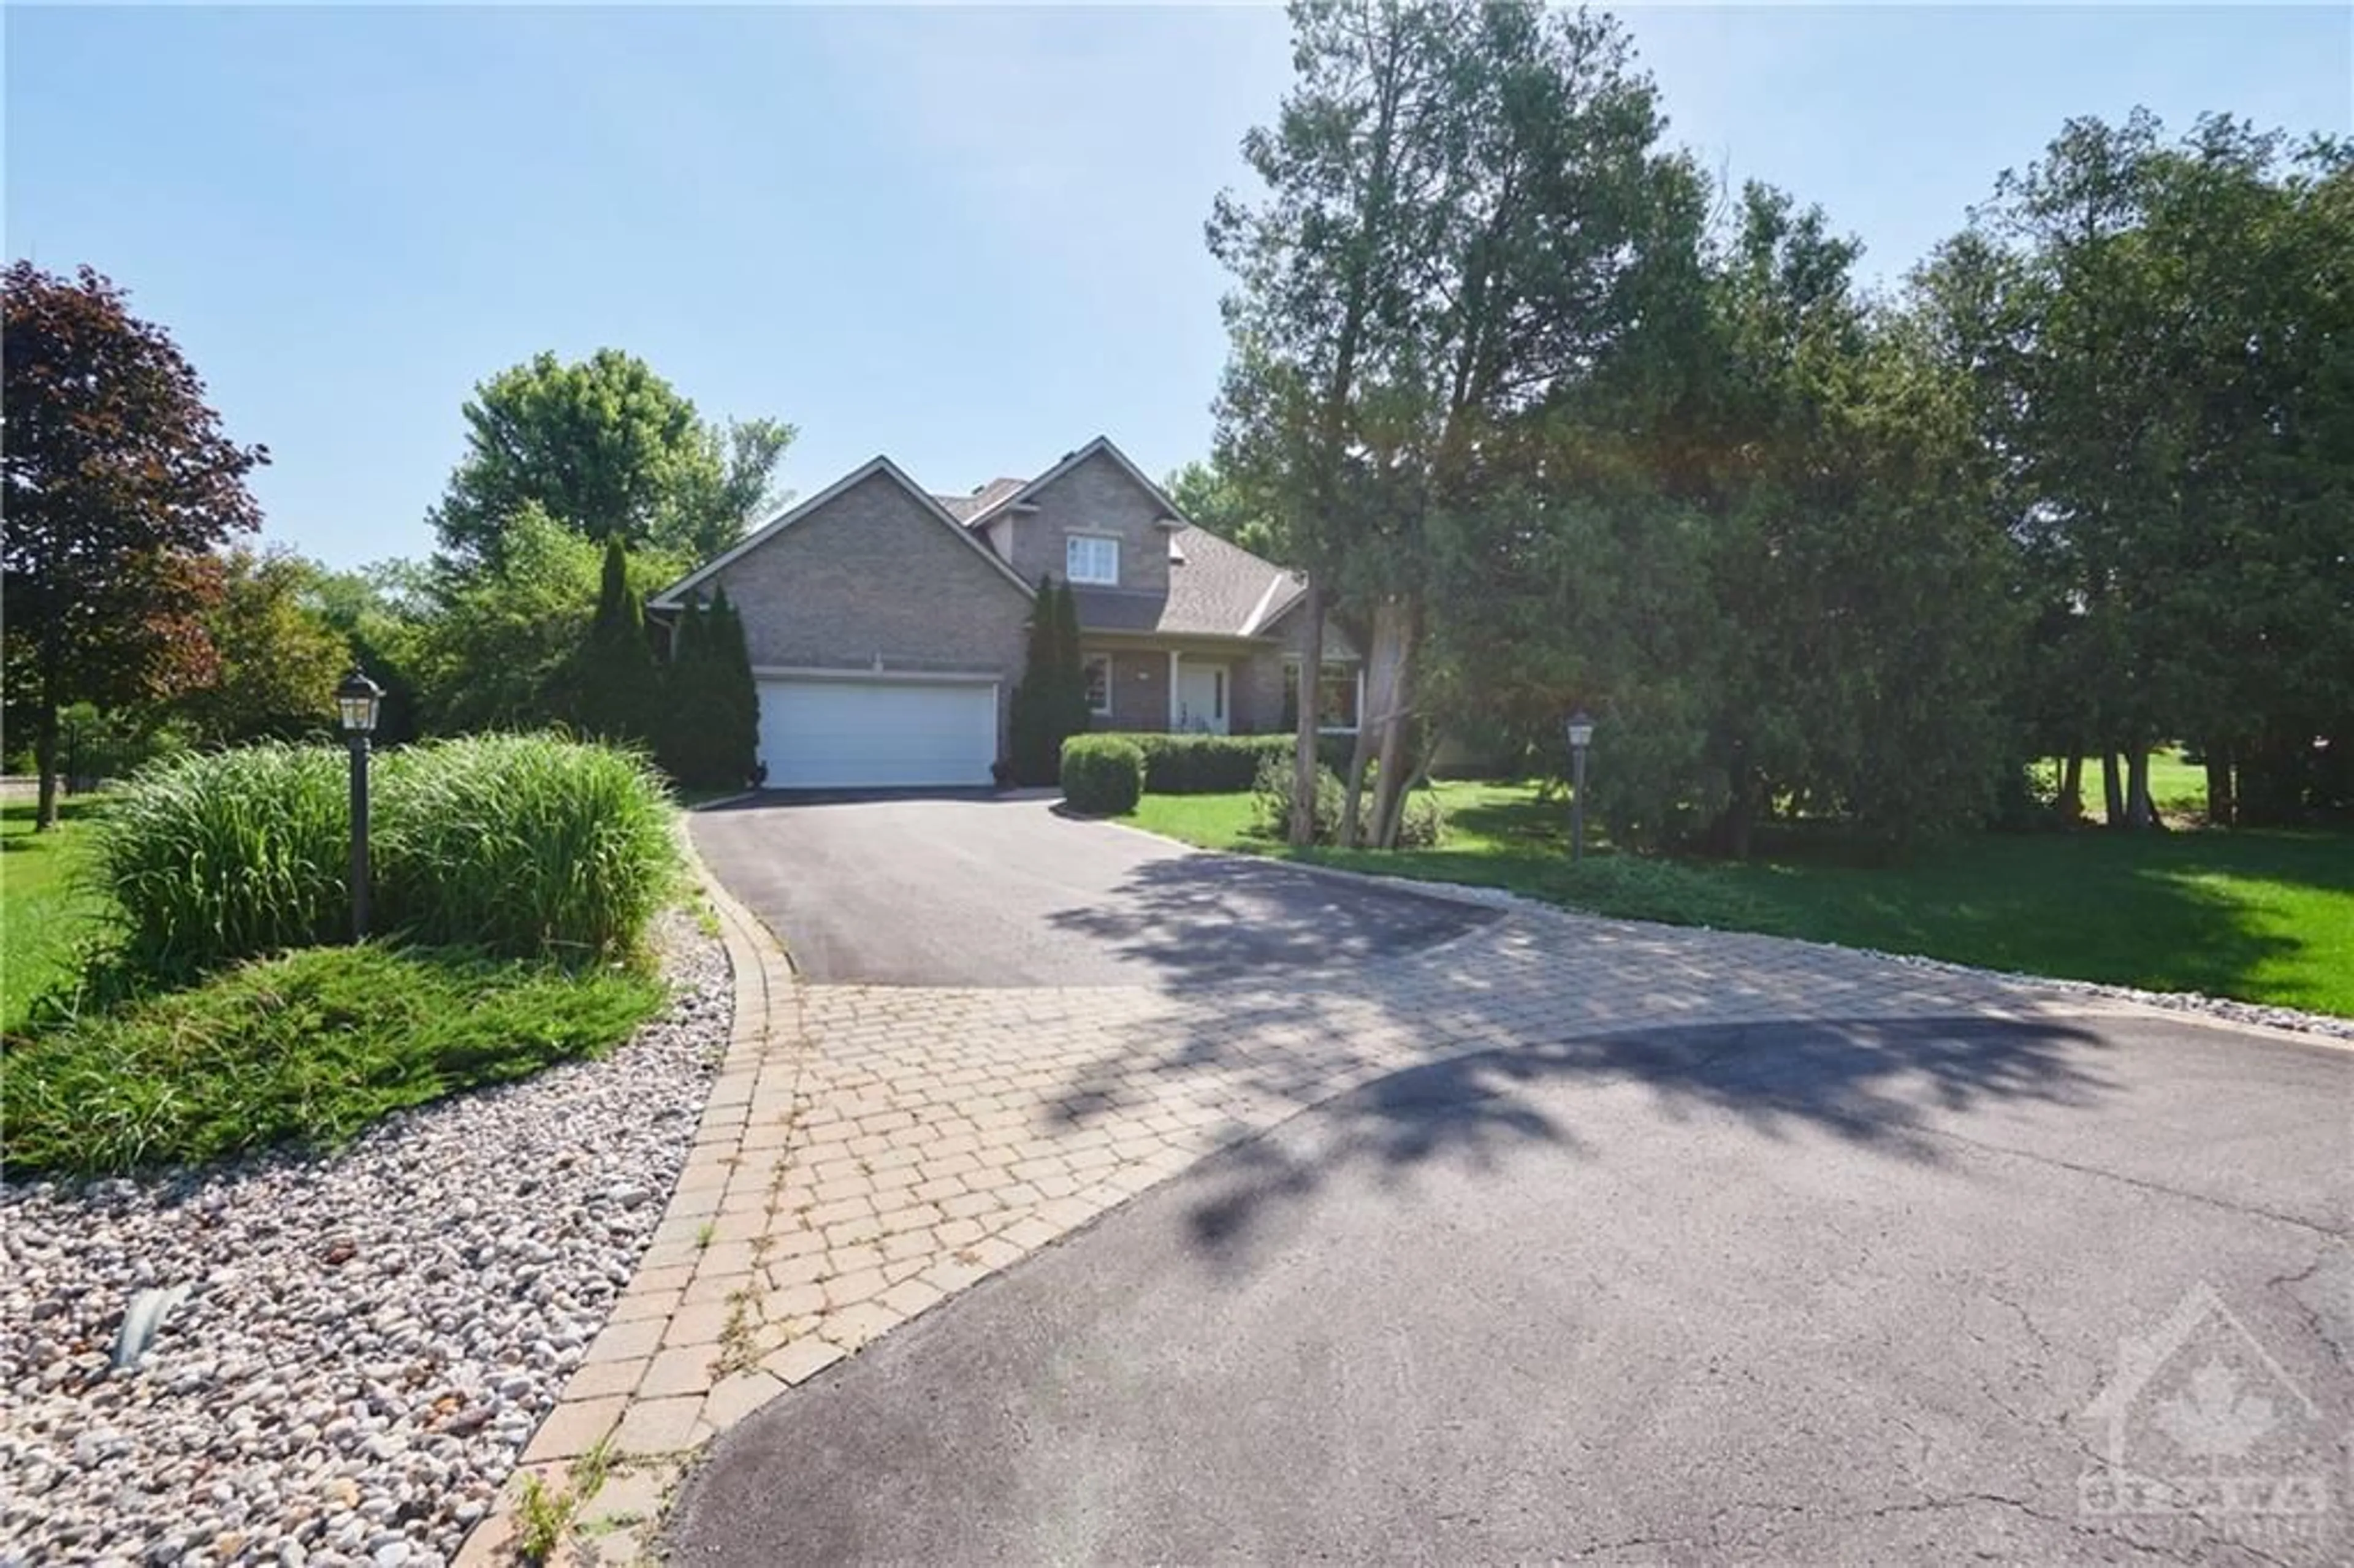 Frontside or backside of a home for 1257 TINTERN Dr, Ottawa Ontario K4P 1P5